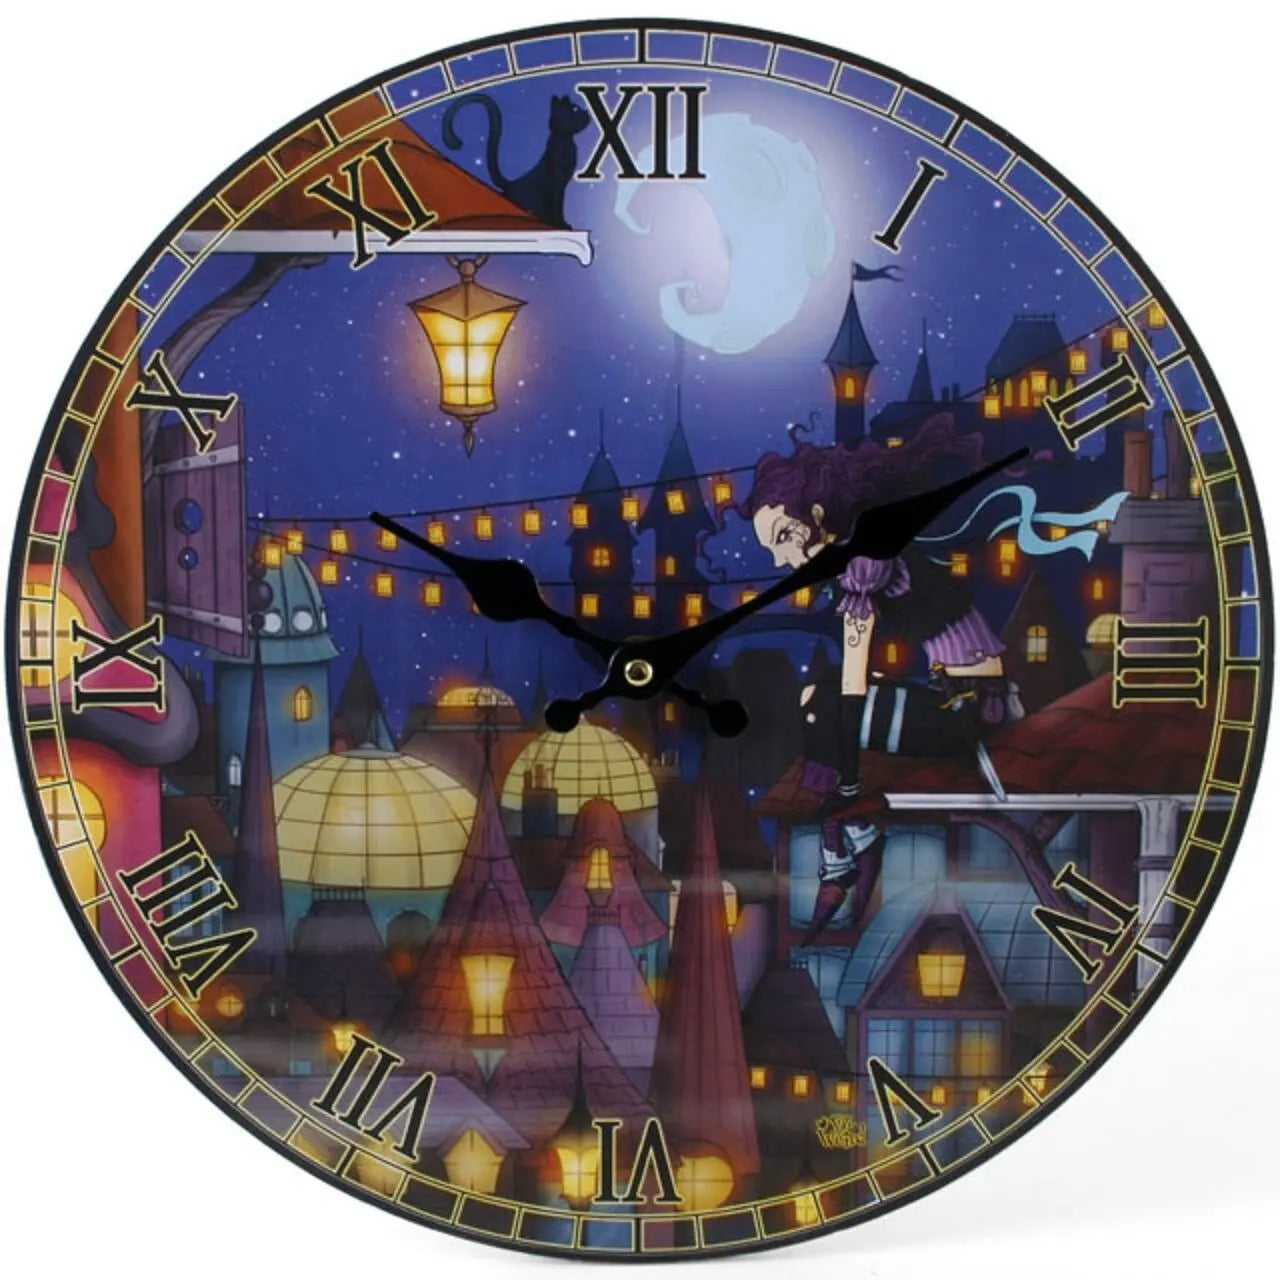 PAGAN/WICCAN/WITCHY/NEW AGE FABLE CITY Clock by Dr.Weird .wooden.34cm x 34cm DR WIERD